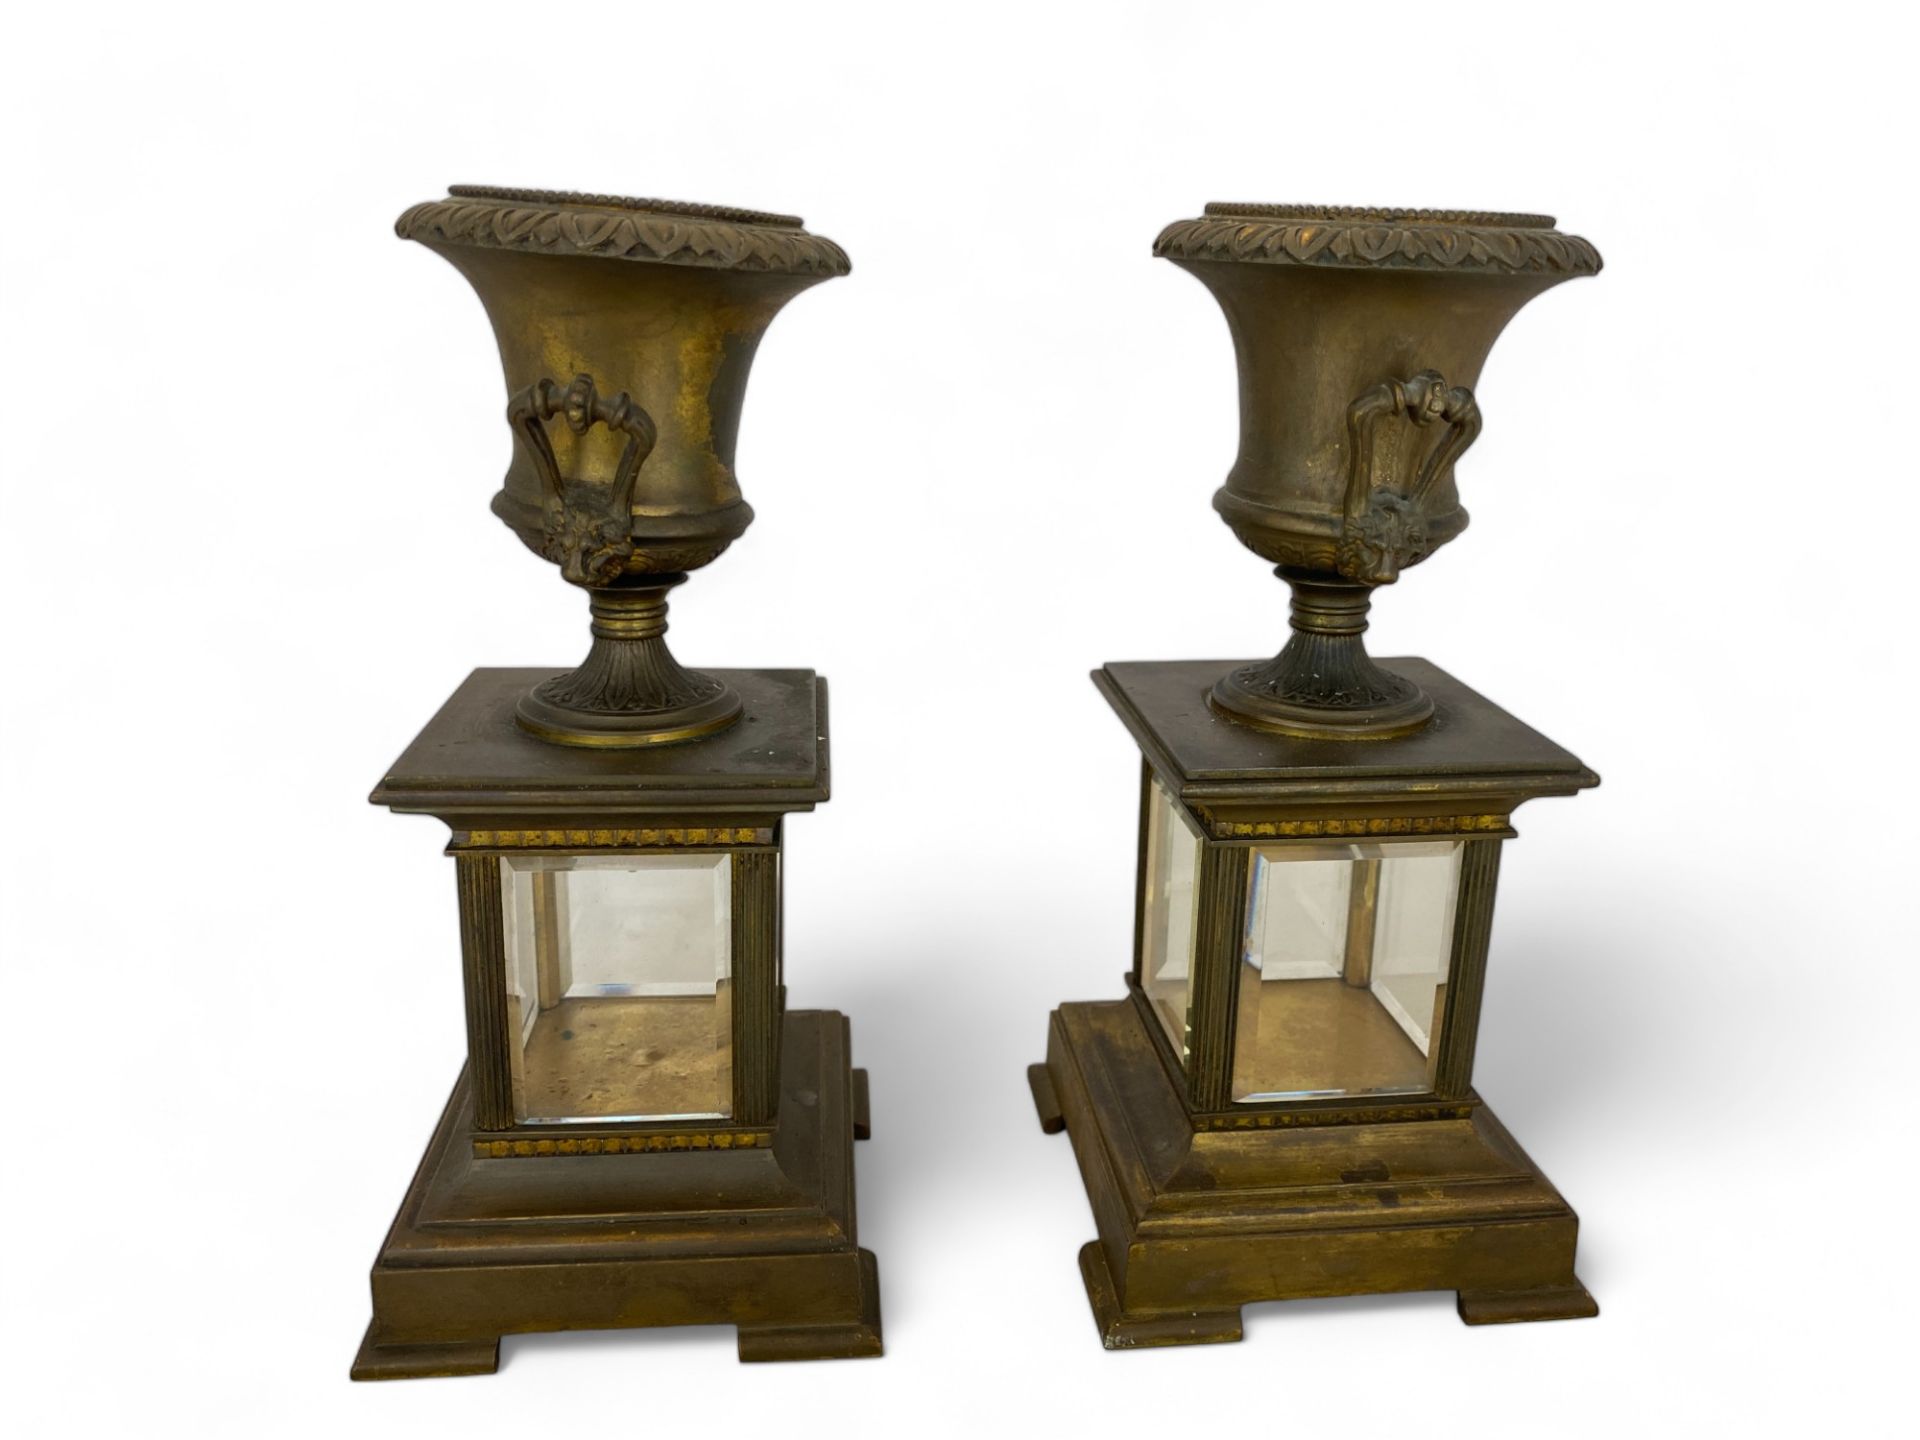 A pair of 19th century gilt bronze chimney ornaments - Image 4 of 12